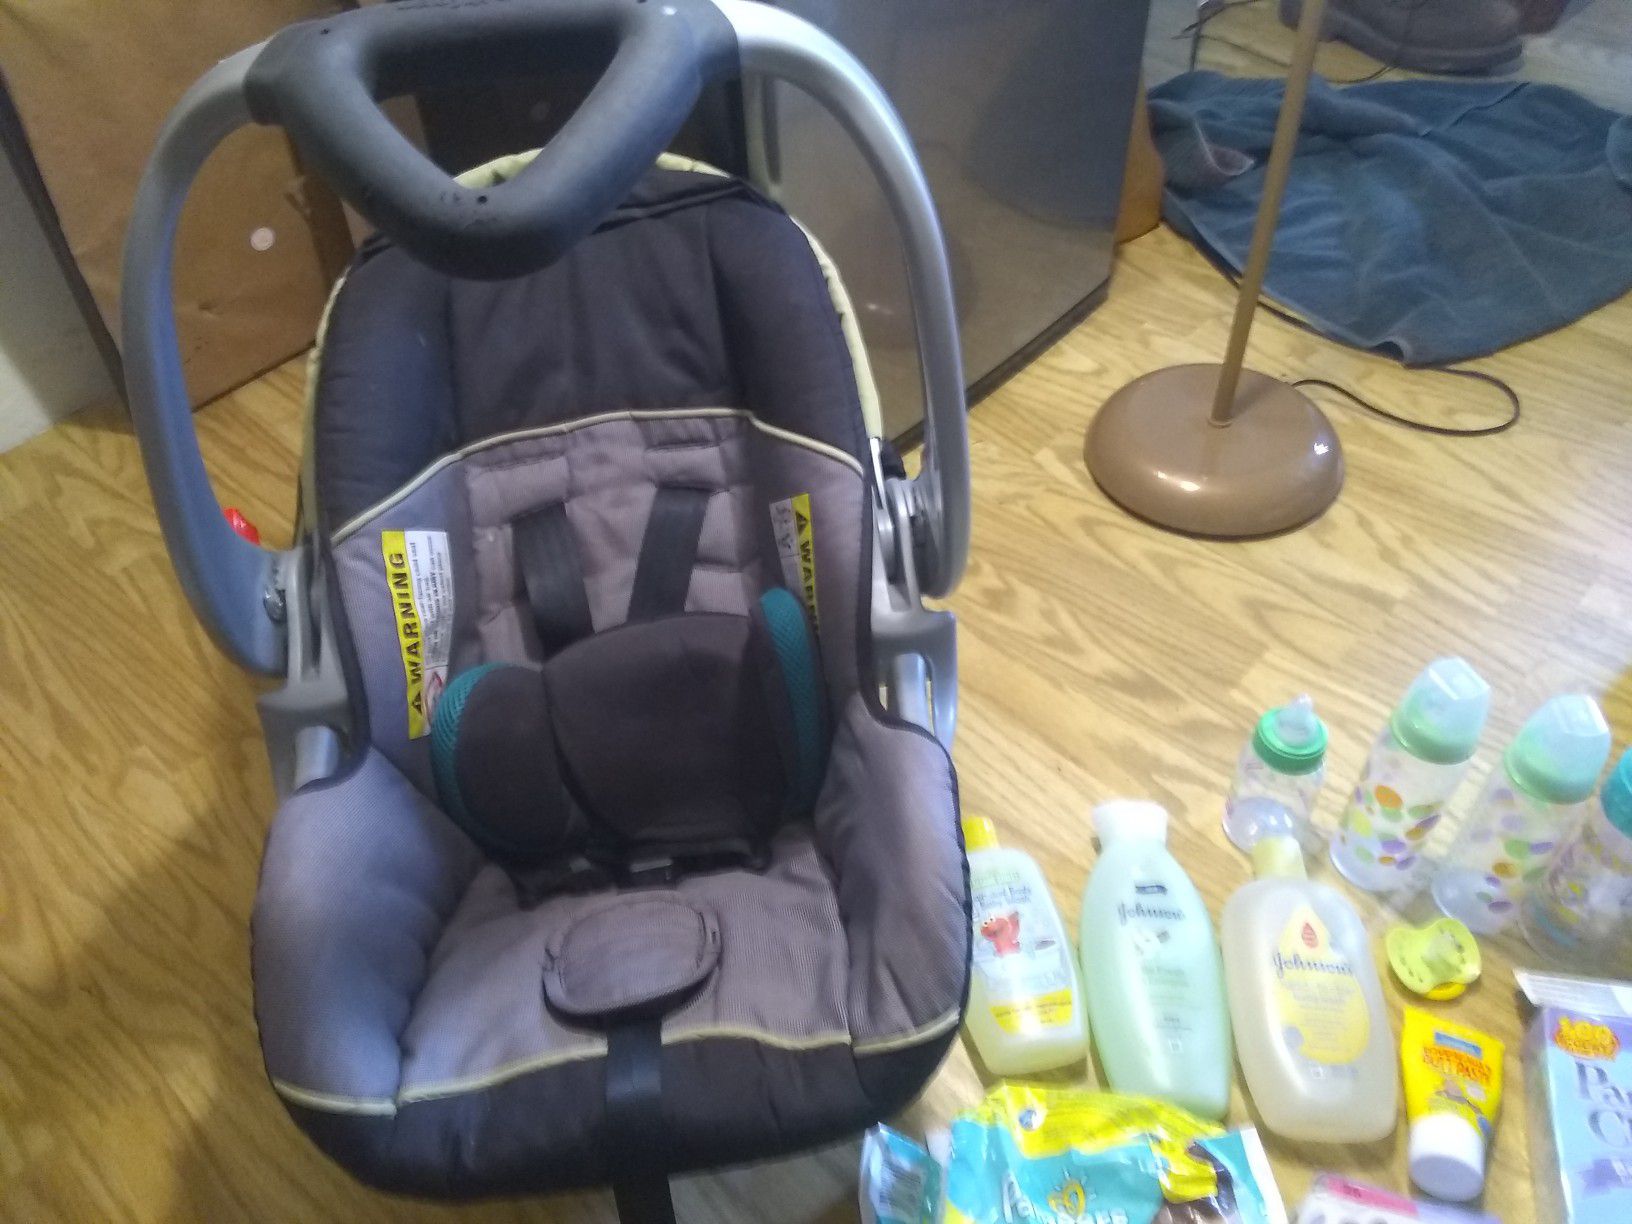 Car seat, clothing, and misc. accessories